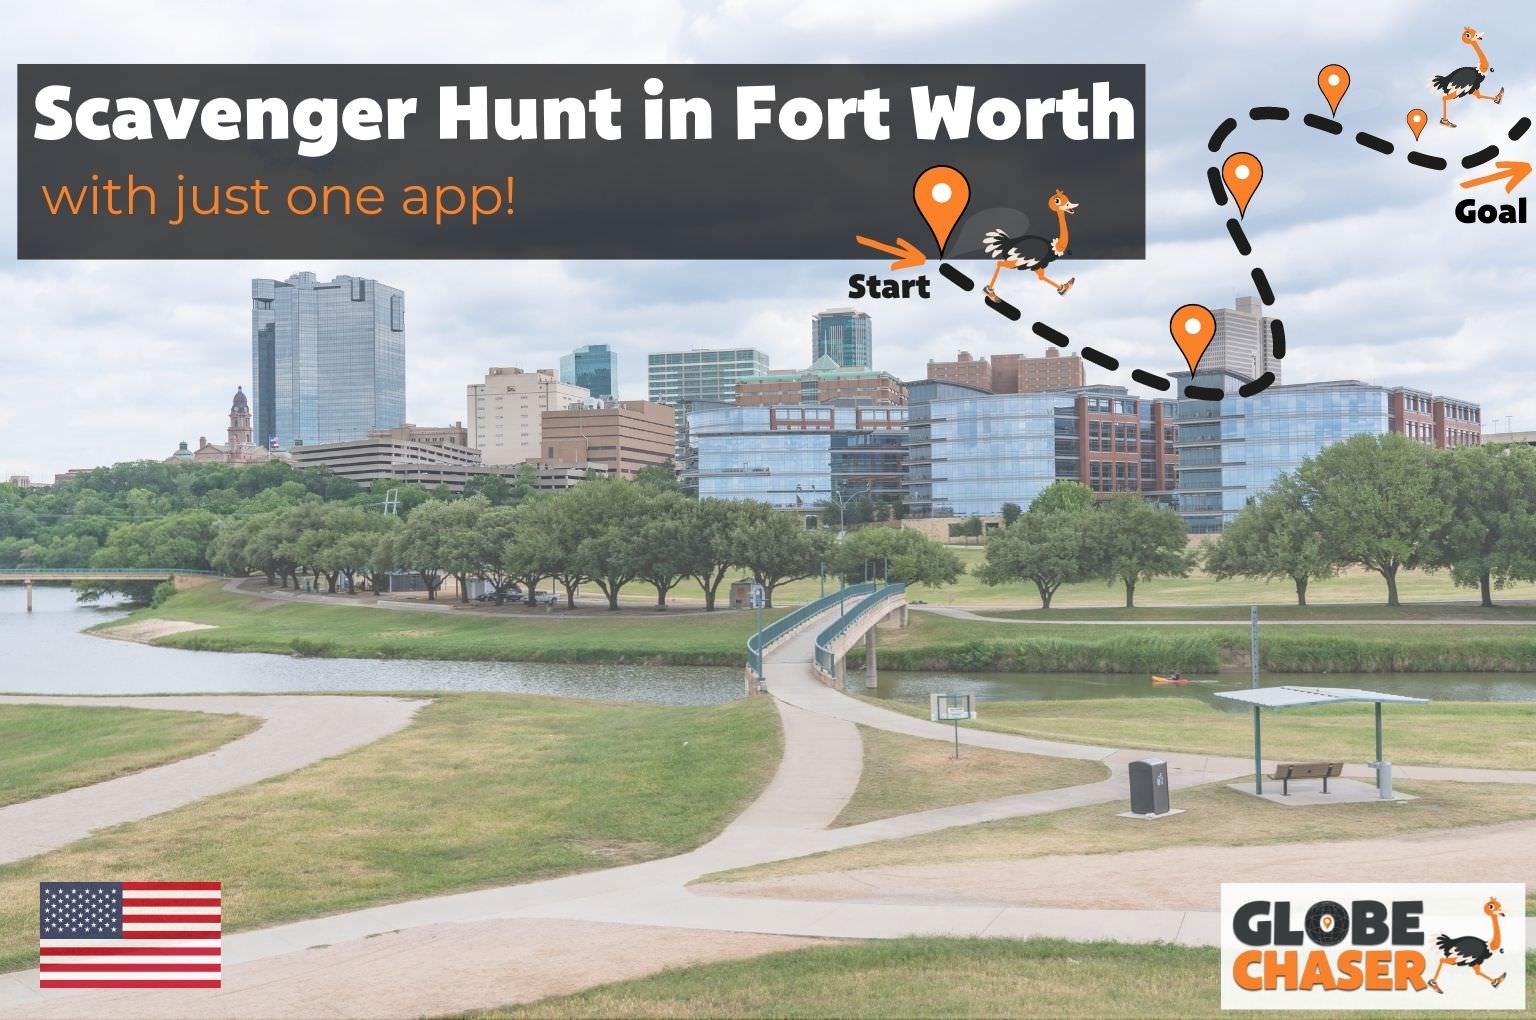 Scavenger Hunt in Fort Worth, USA - Family Activities with the Globe Chaser App for Outdoor Fun